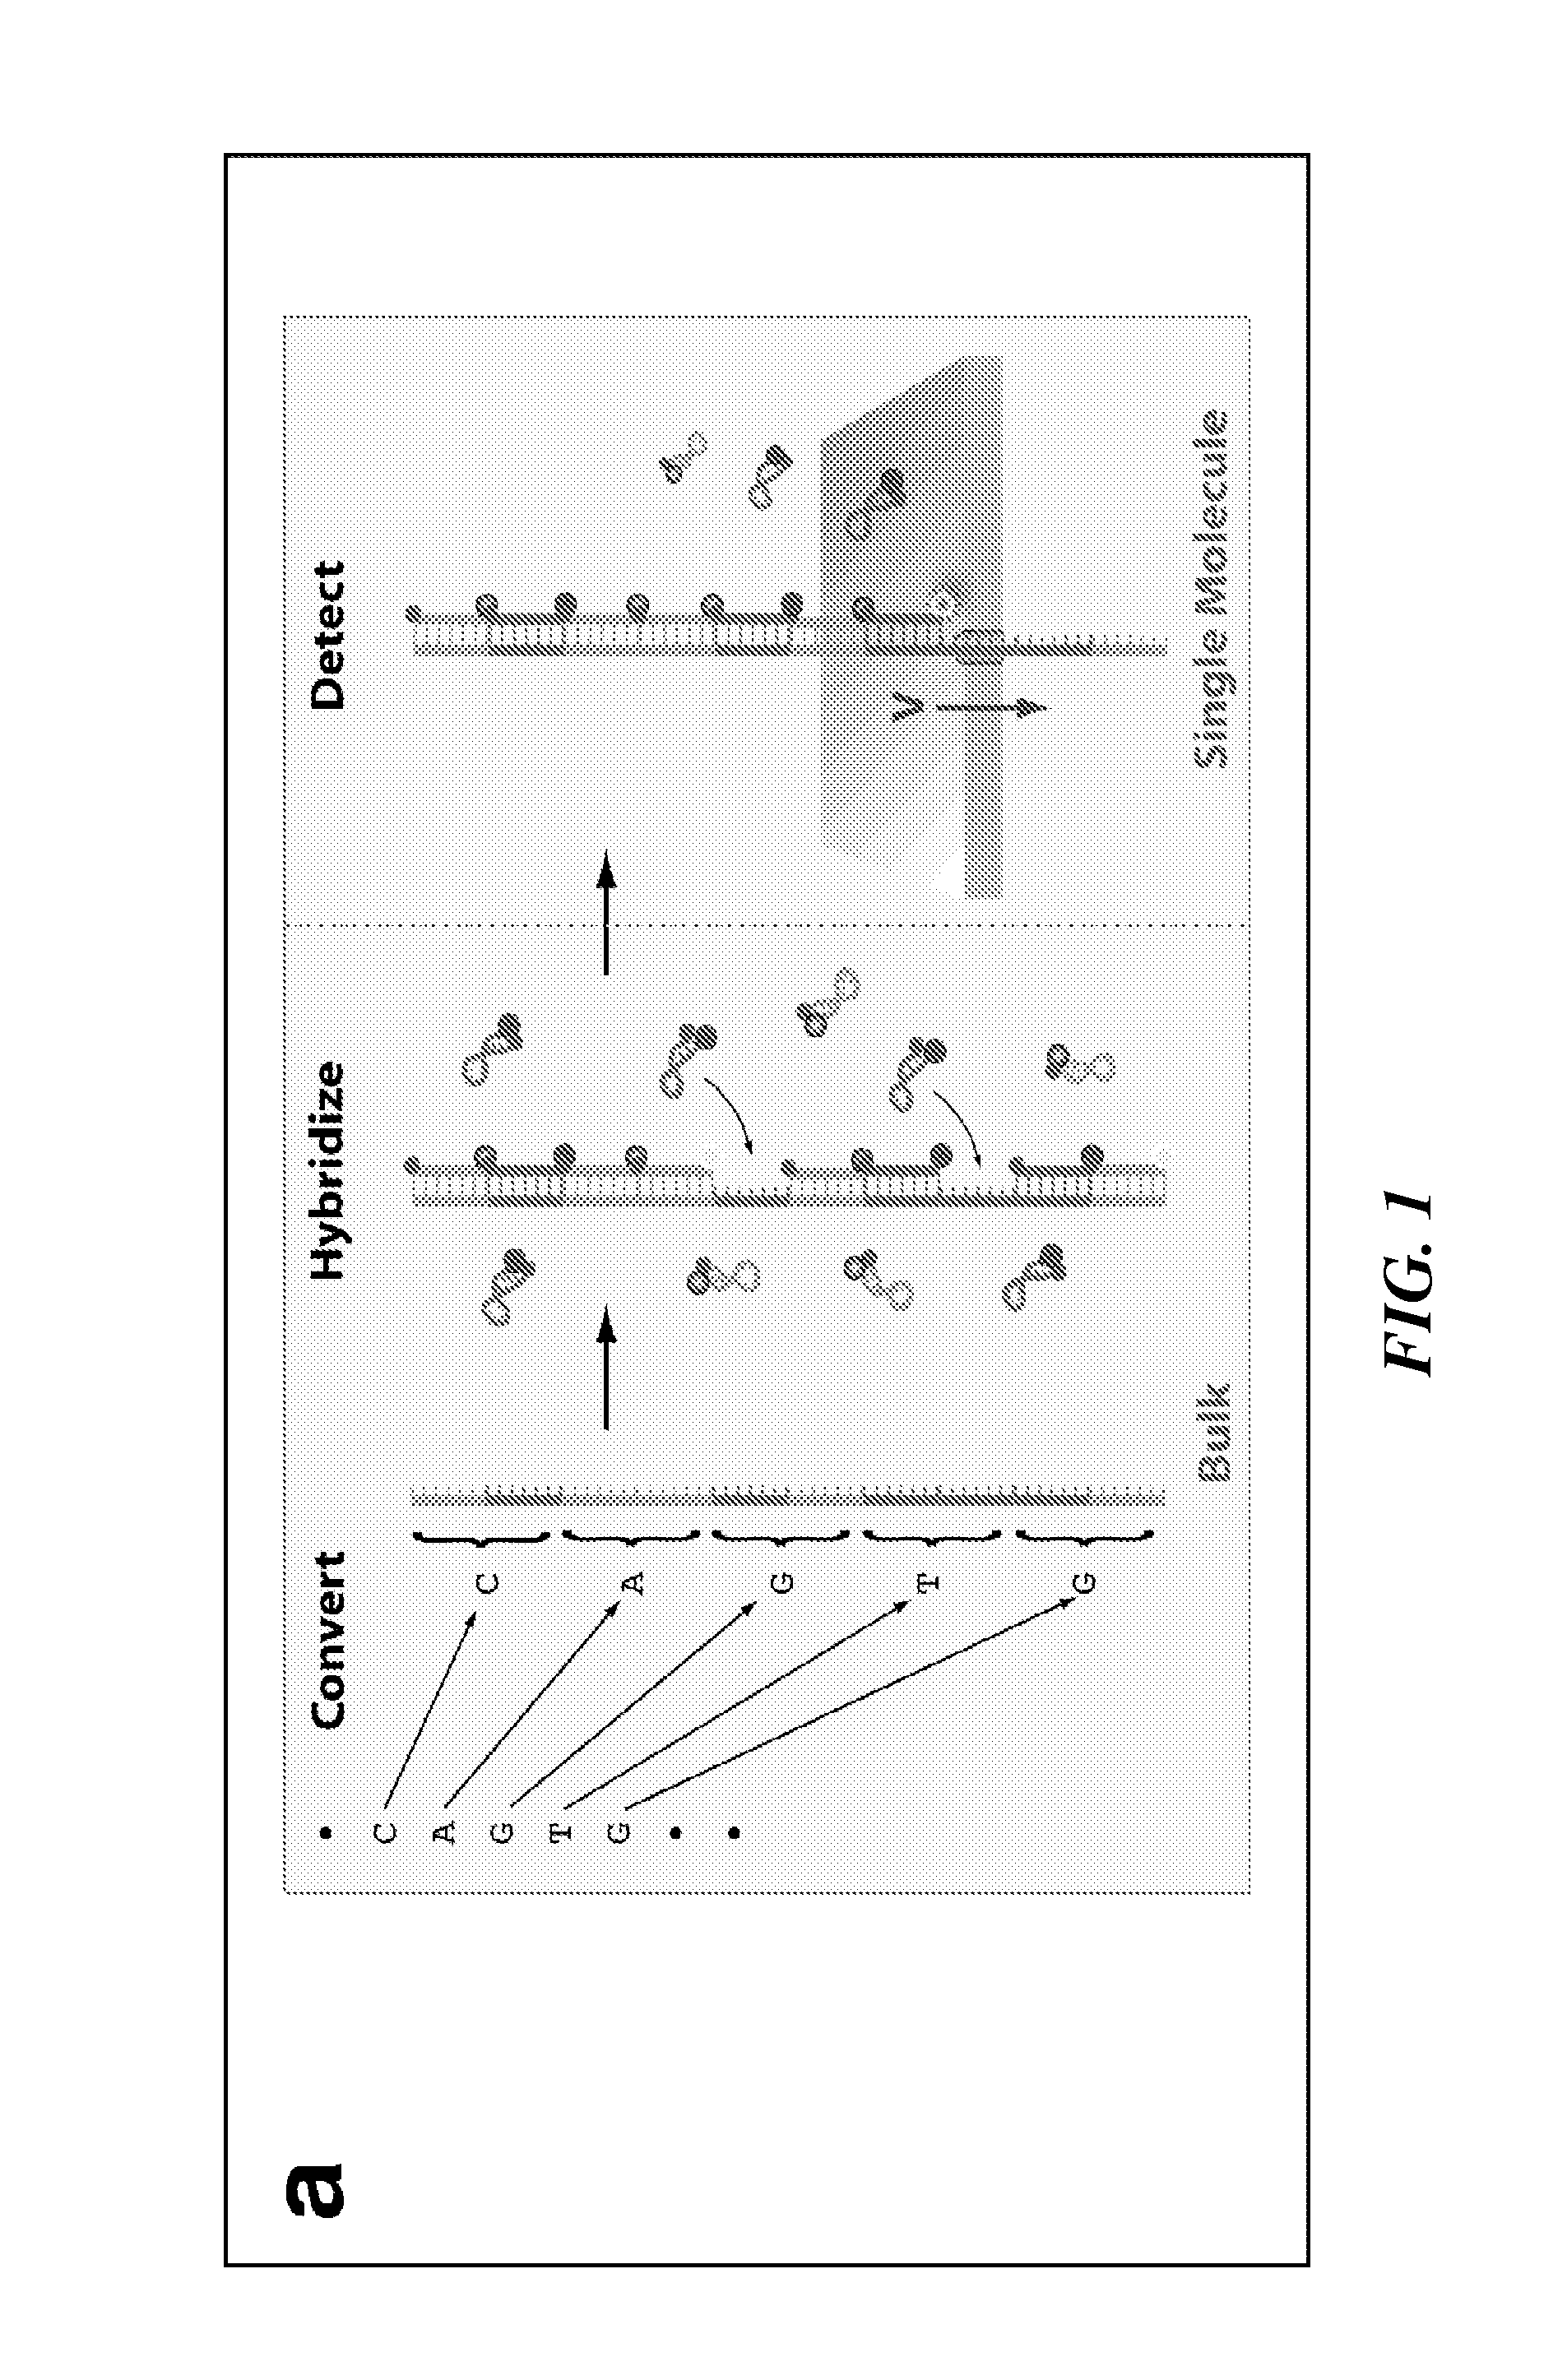 Tools and Method for Nanopores Unzipping-Dependent Nucleic Acid Sequencing